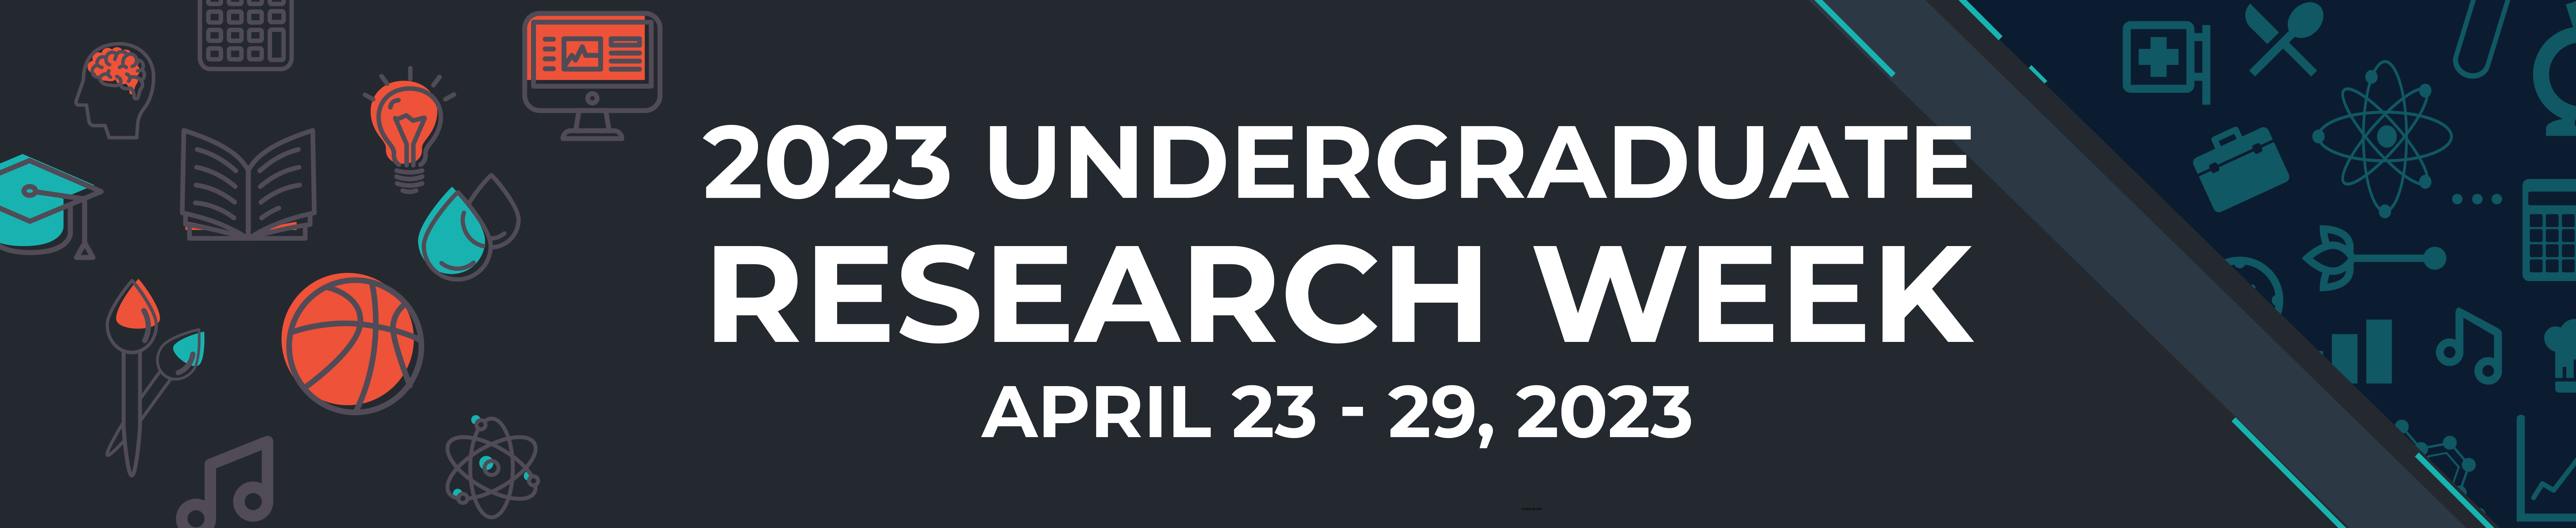 background image of undergraduate research week